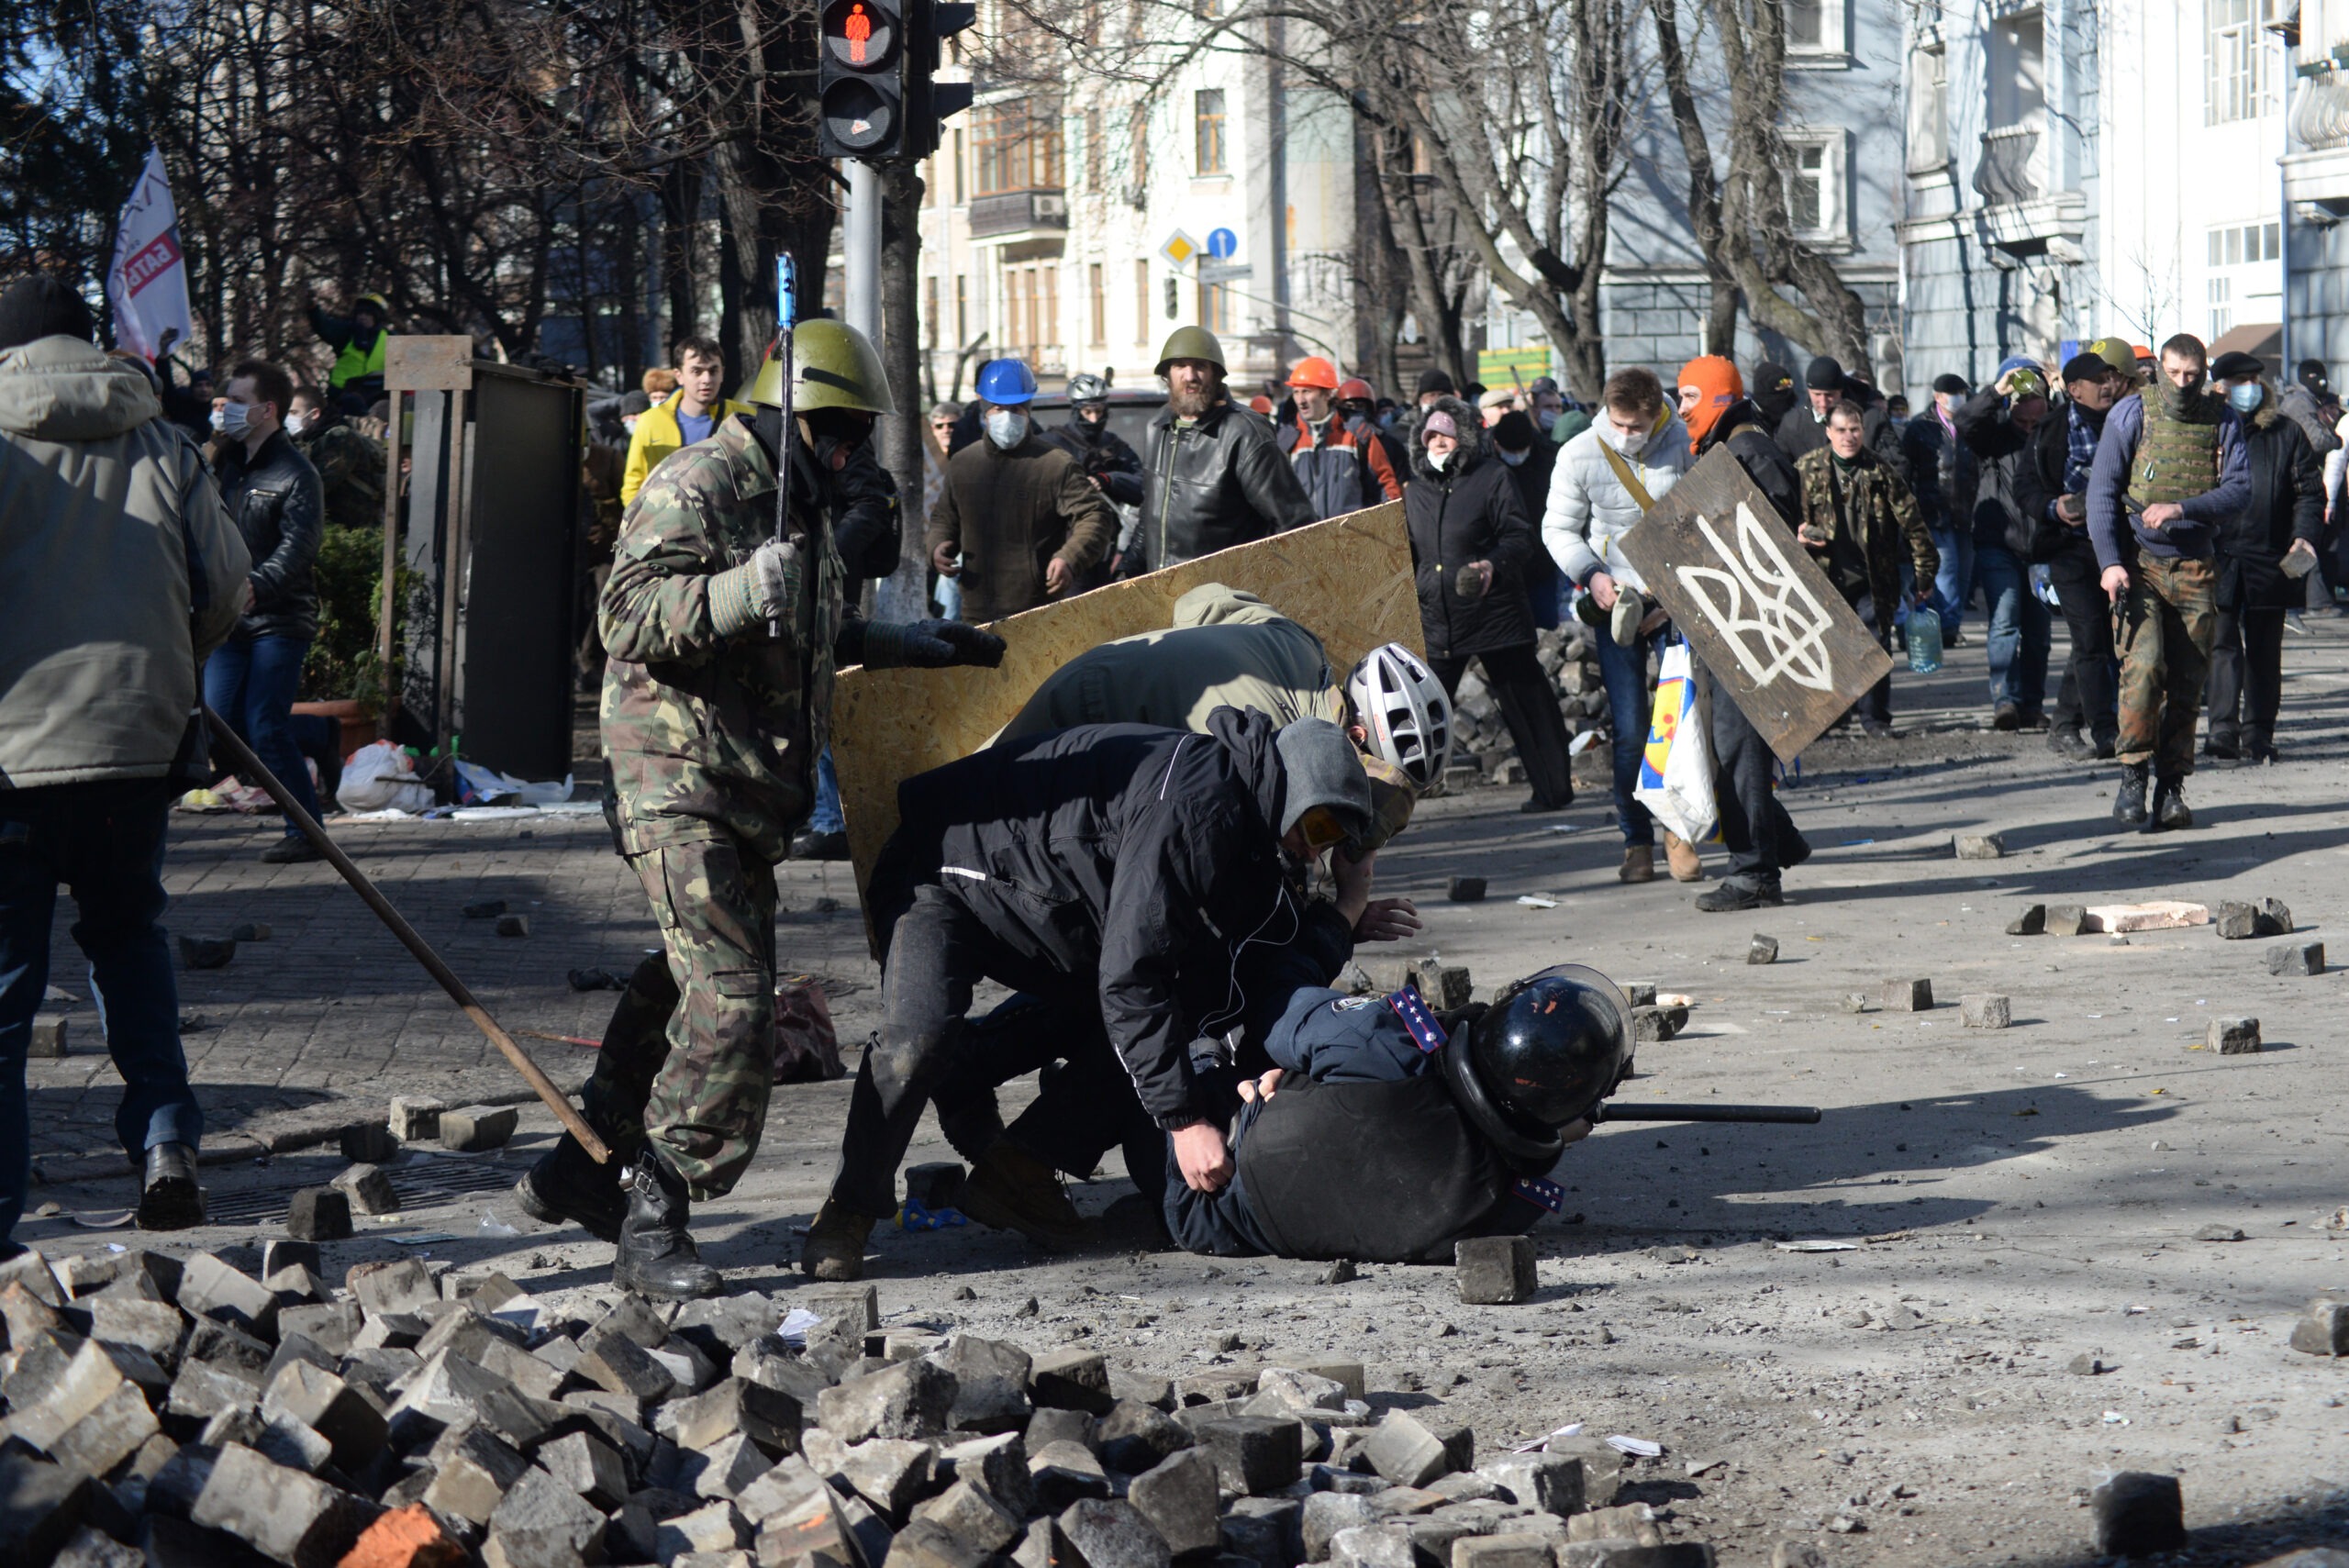 The Last Major Ukrainian City Is Under Control Of Pro-Russian Forces